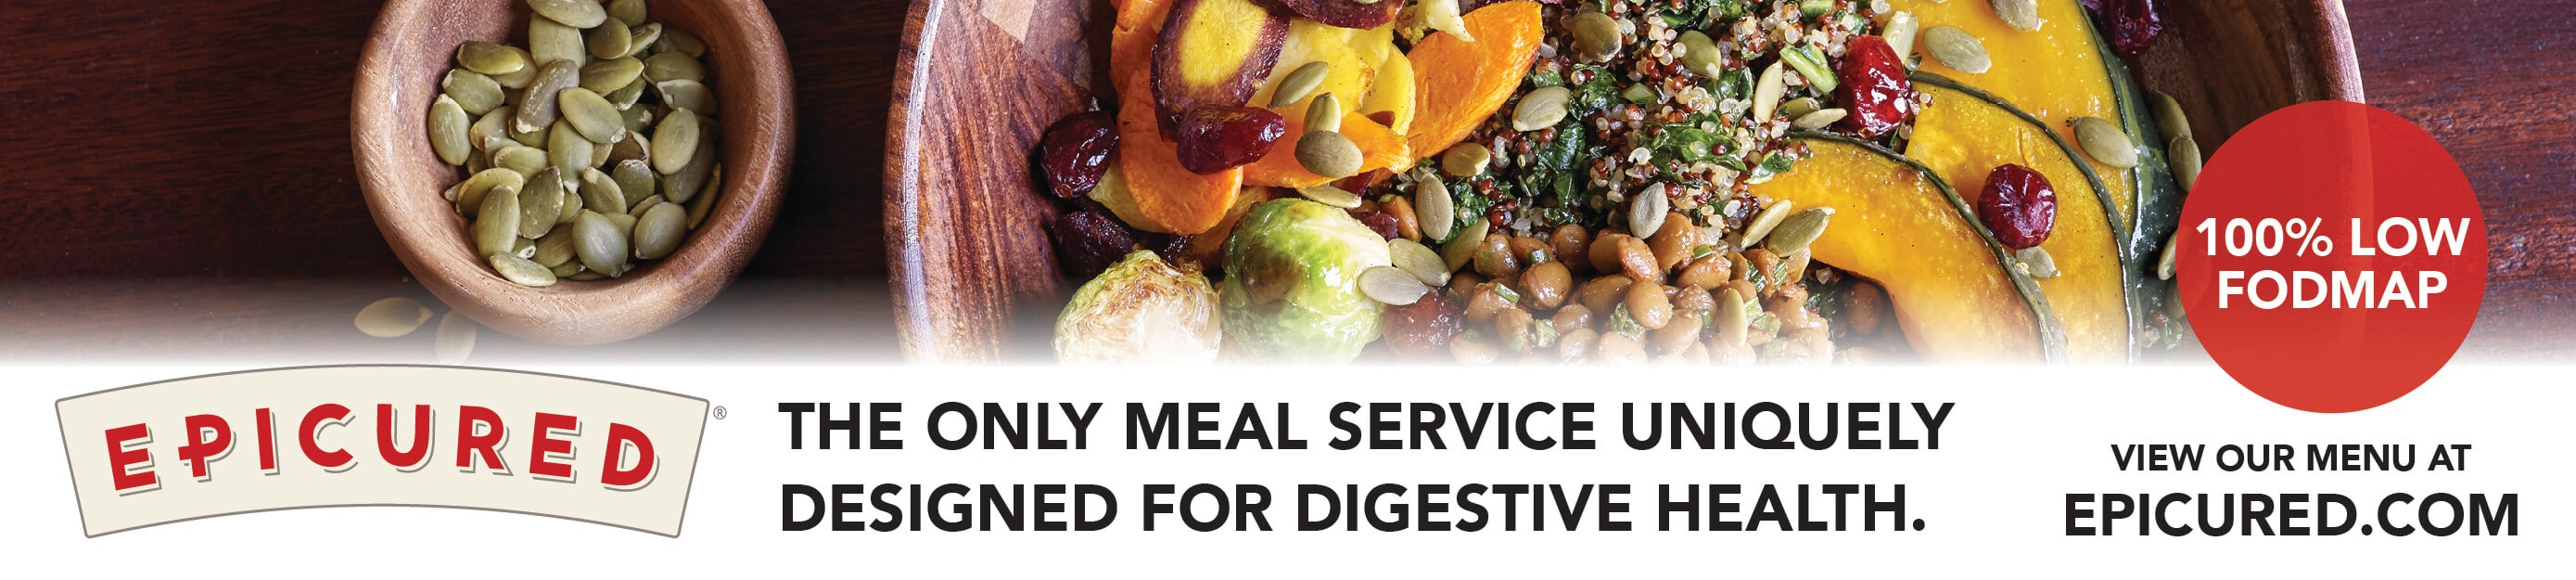 Banner for Epicured's meal service with image of pumpkin seeds and autumnal vegetable dish